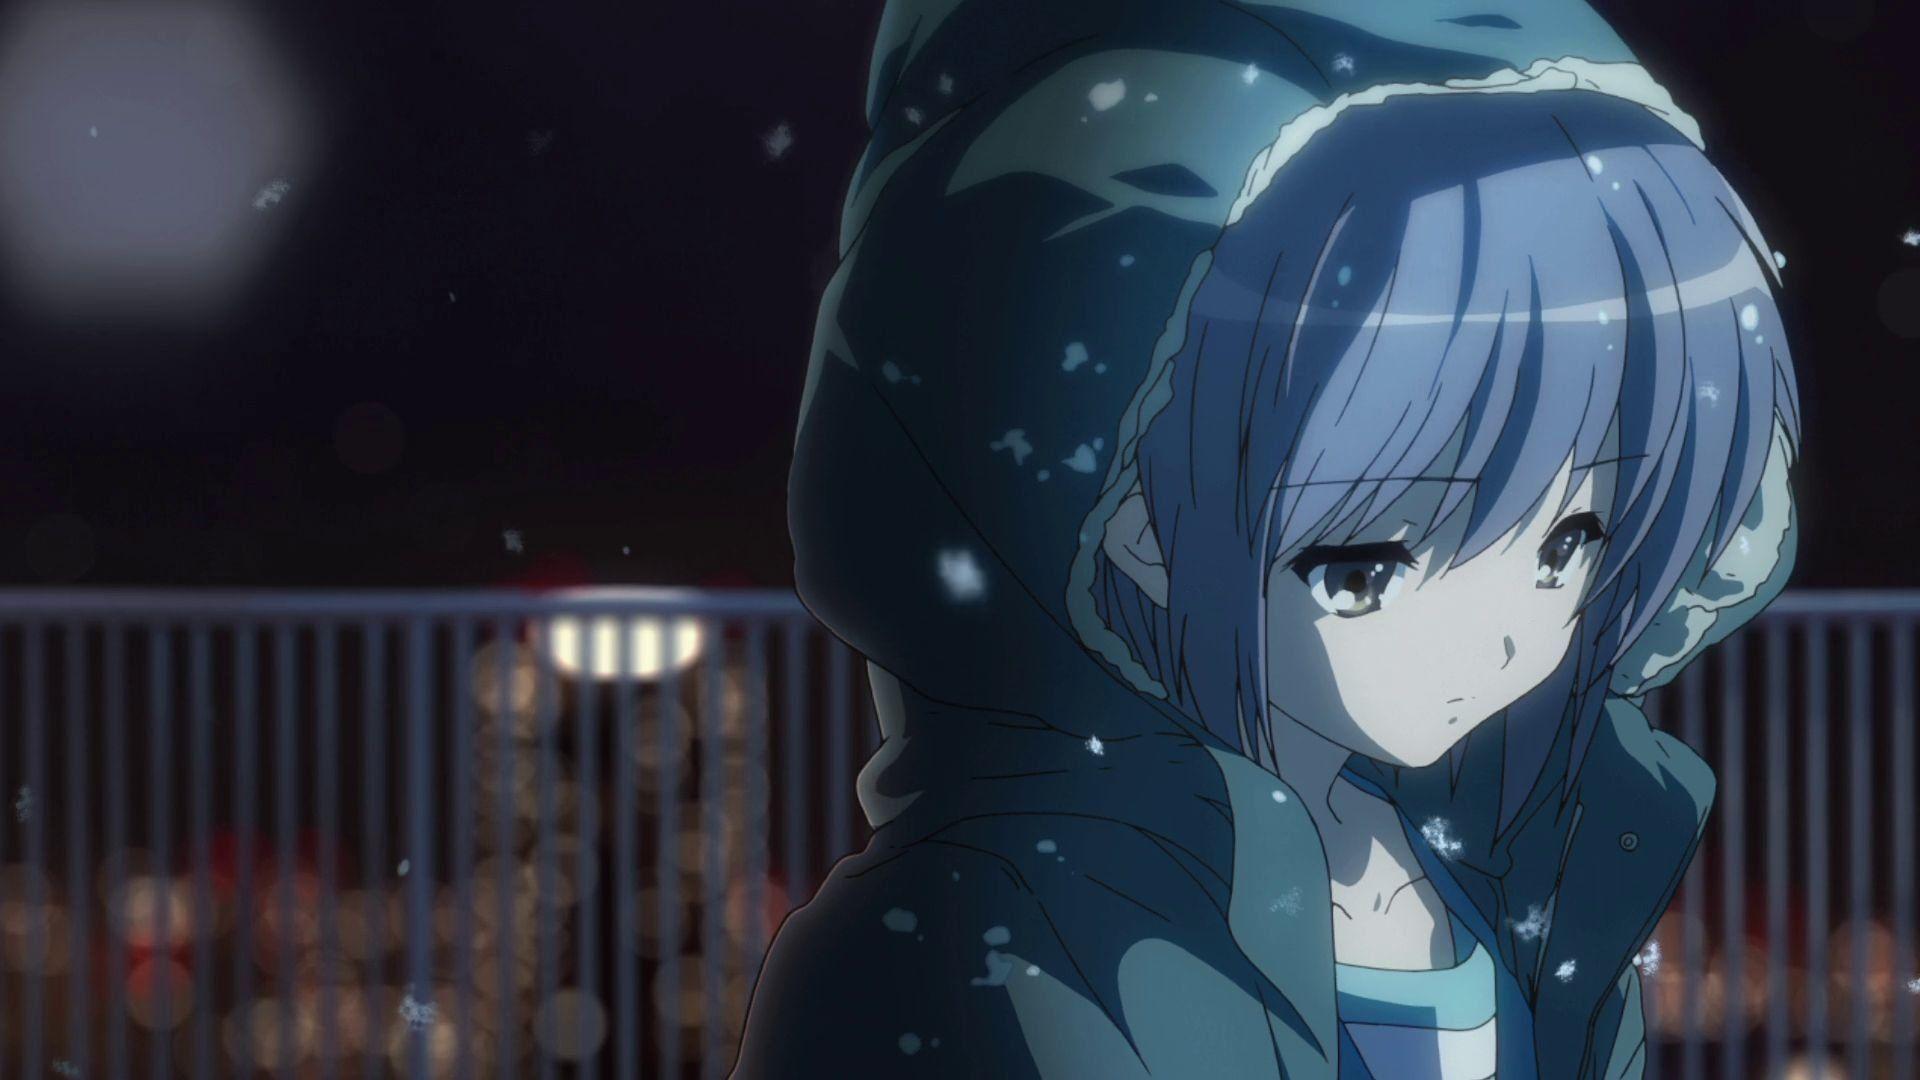 9. "Melancholic Anime Girl with Blue Hair" - wide 1